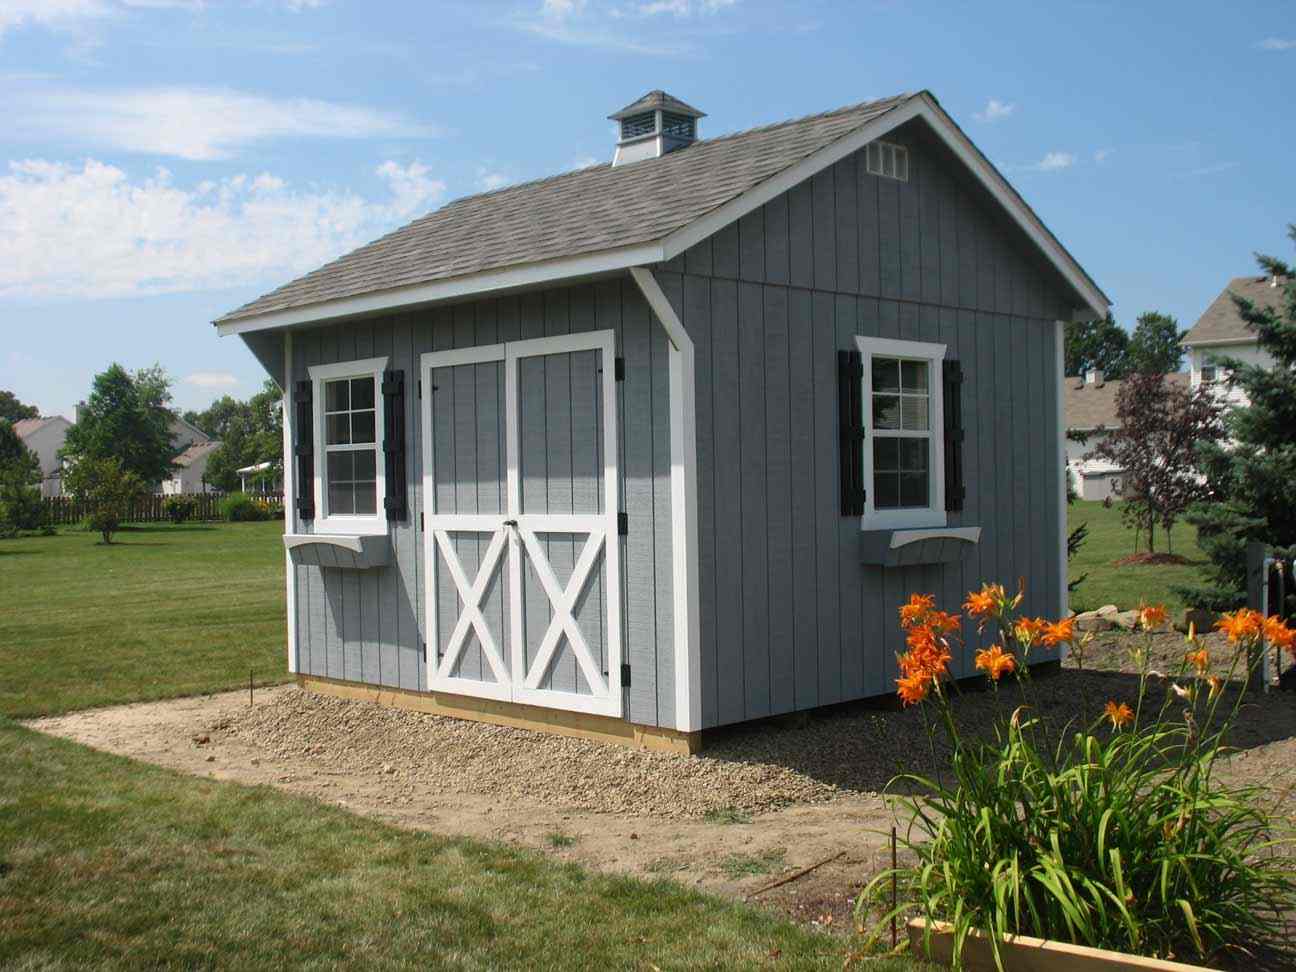 Carriage House Storage Shed Pricing & Options List ...